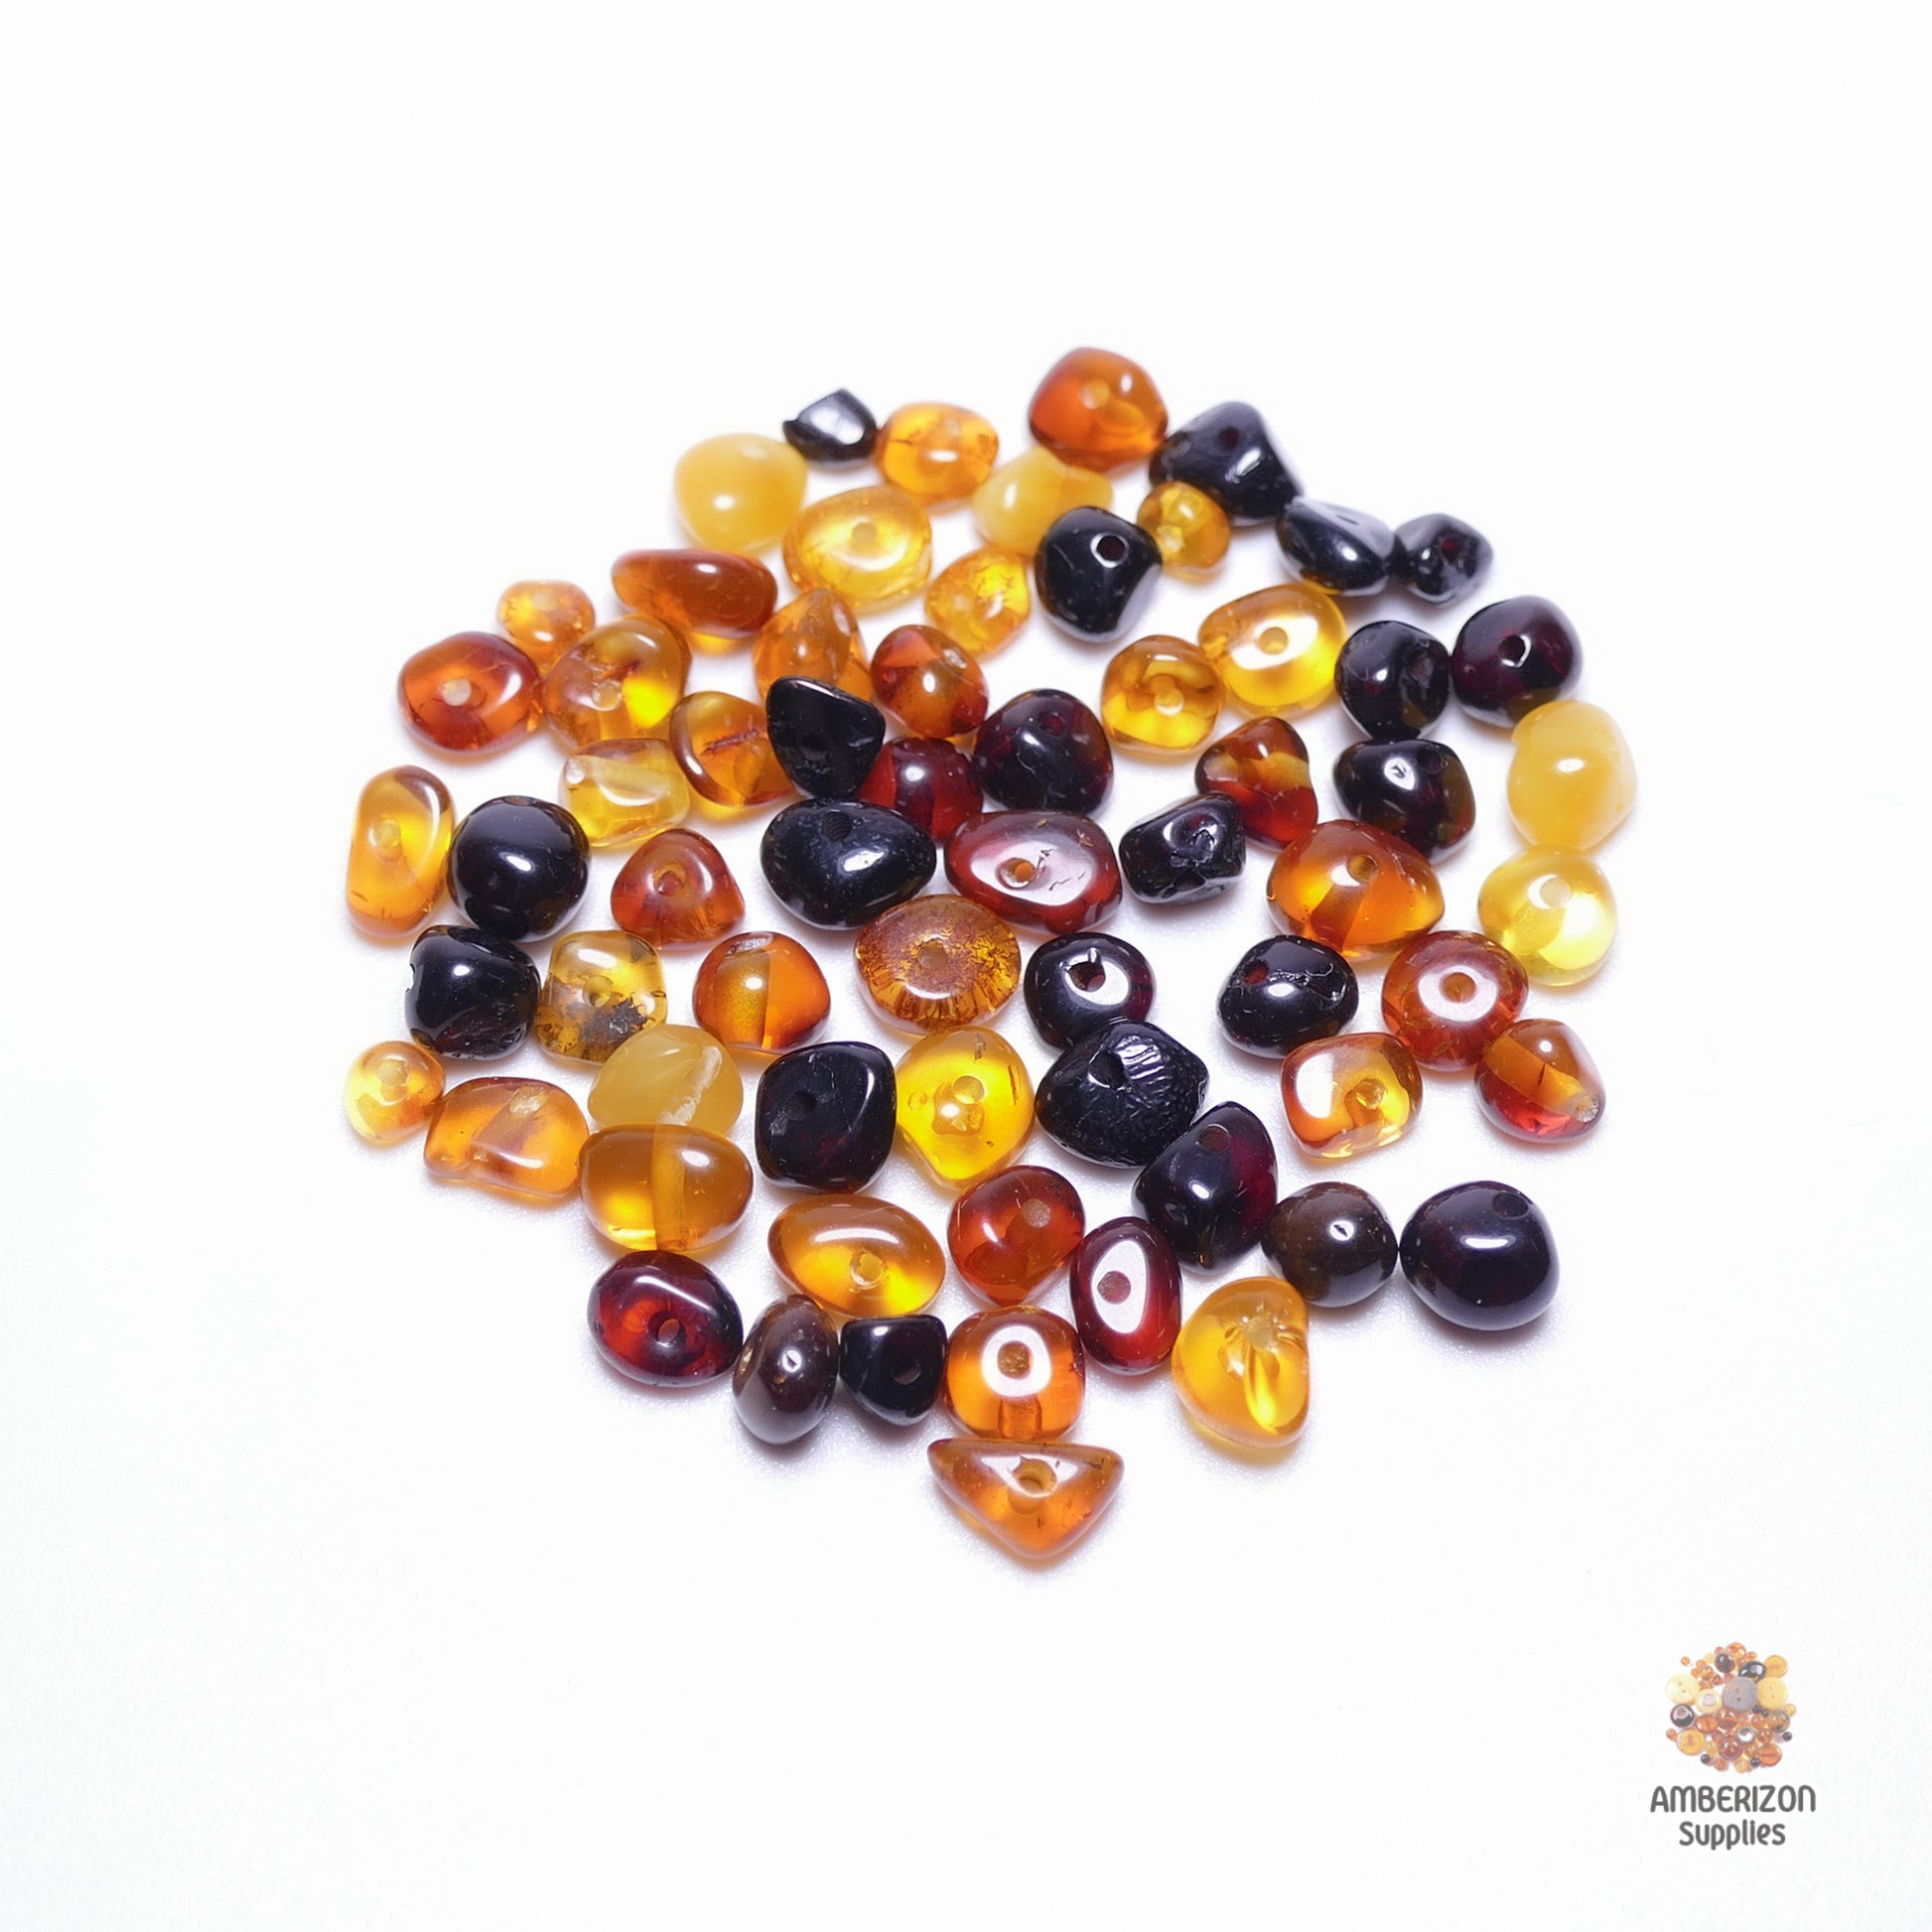 Handcrafted Baltic Amber Rounded Chips, Honey - Lemon - Golden, 4-8mm Mix, Polished Glossy, Sold by Weight - for Jewelry Making, DIY, Crafts, Bead-work